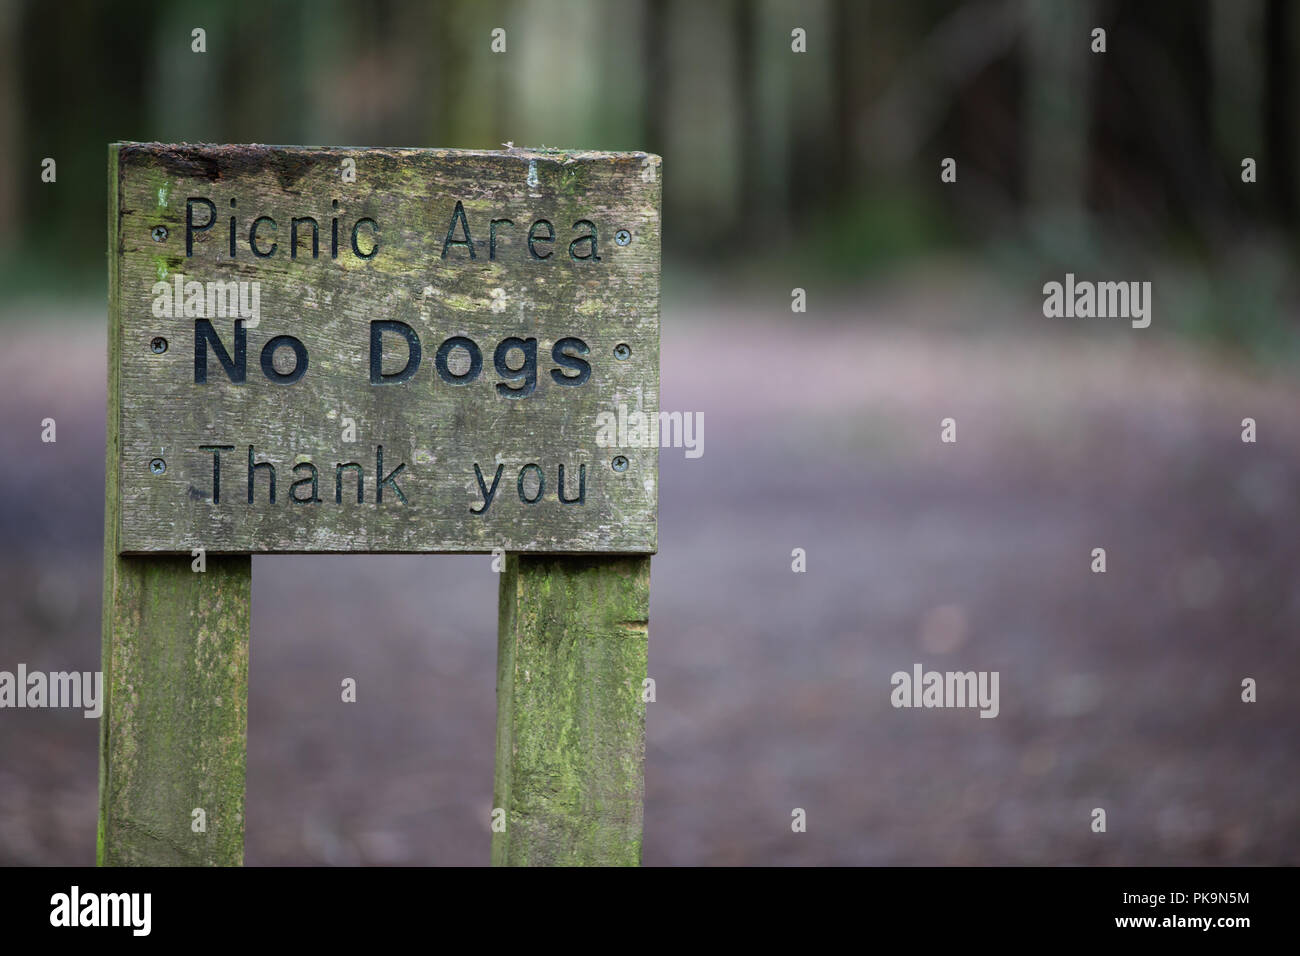 No dogs sign in picnic area Stock Photo